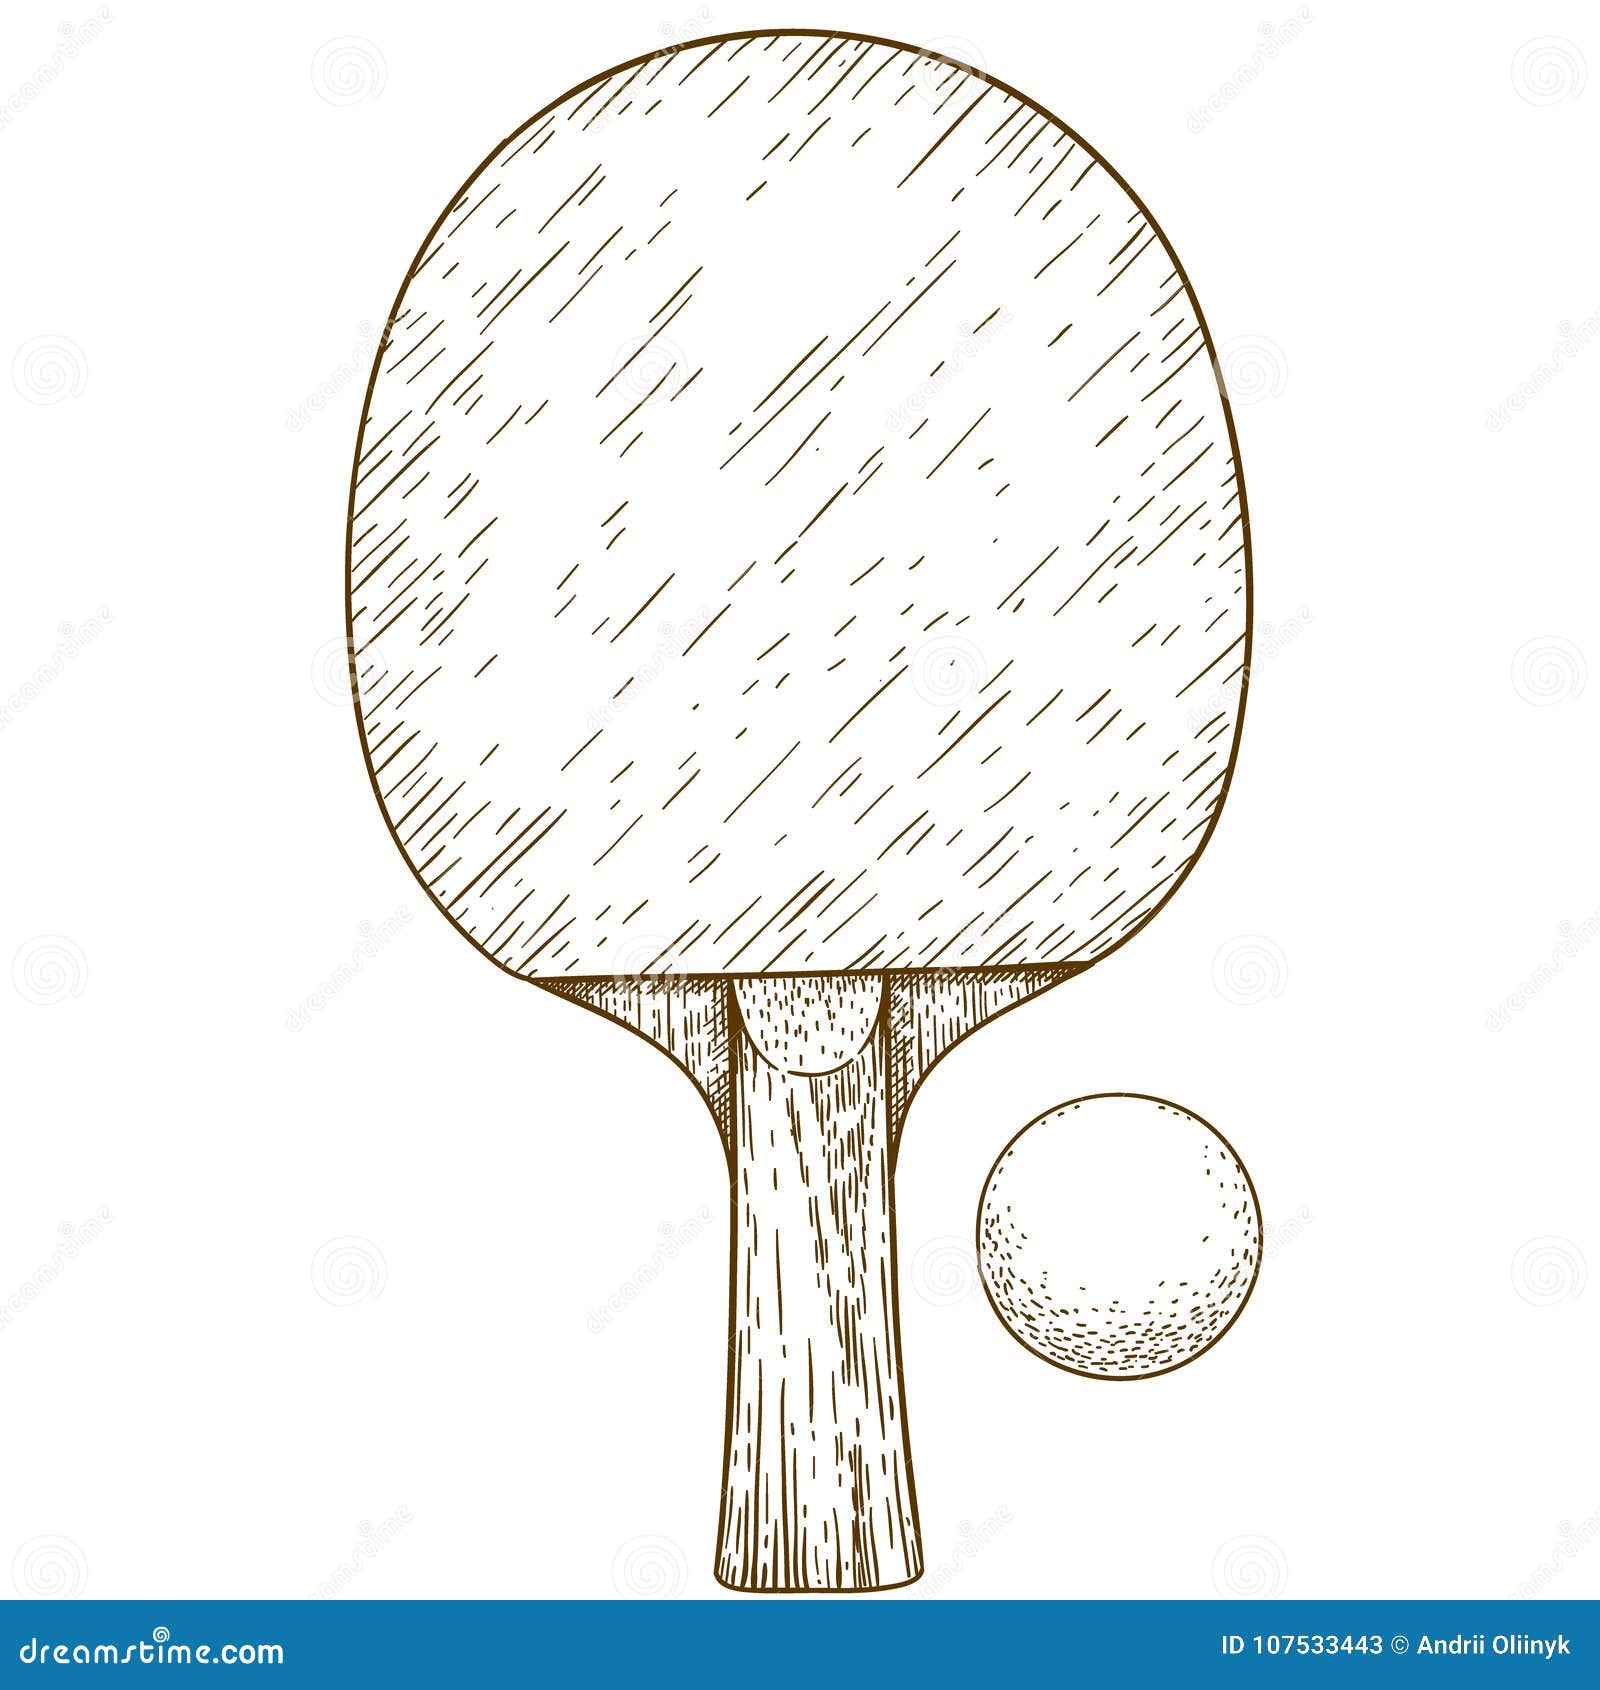 how to draw a ping pong paddle easy - YouTube